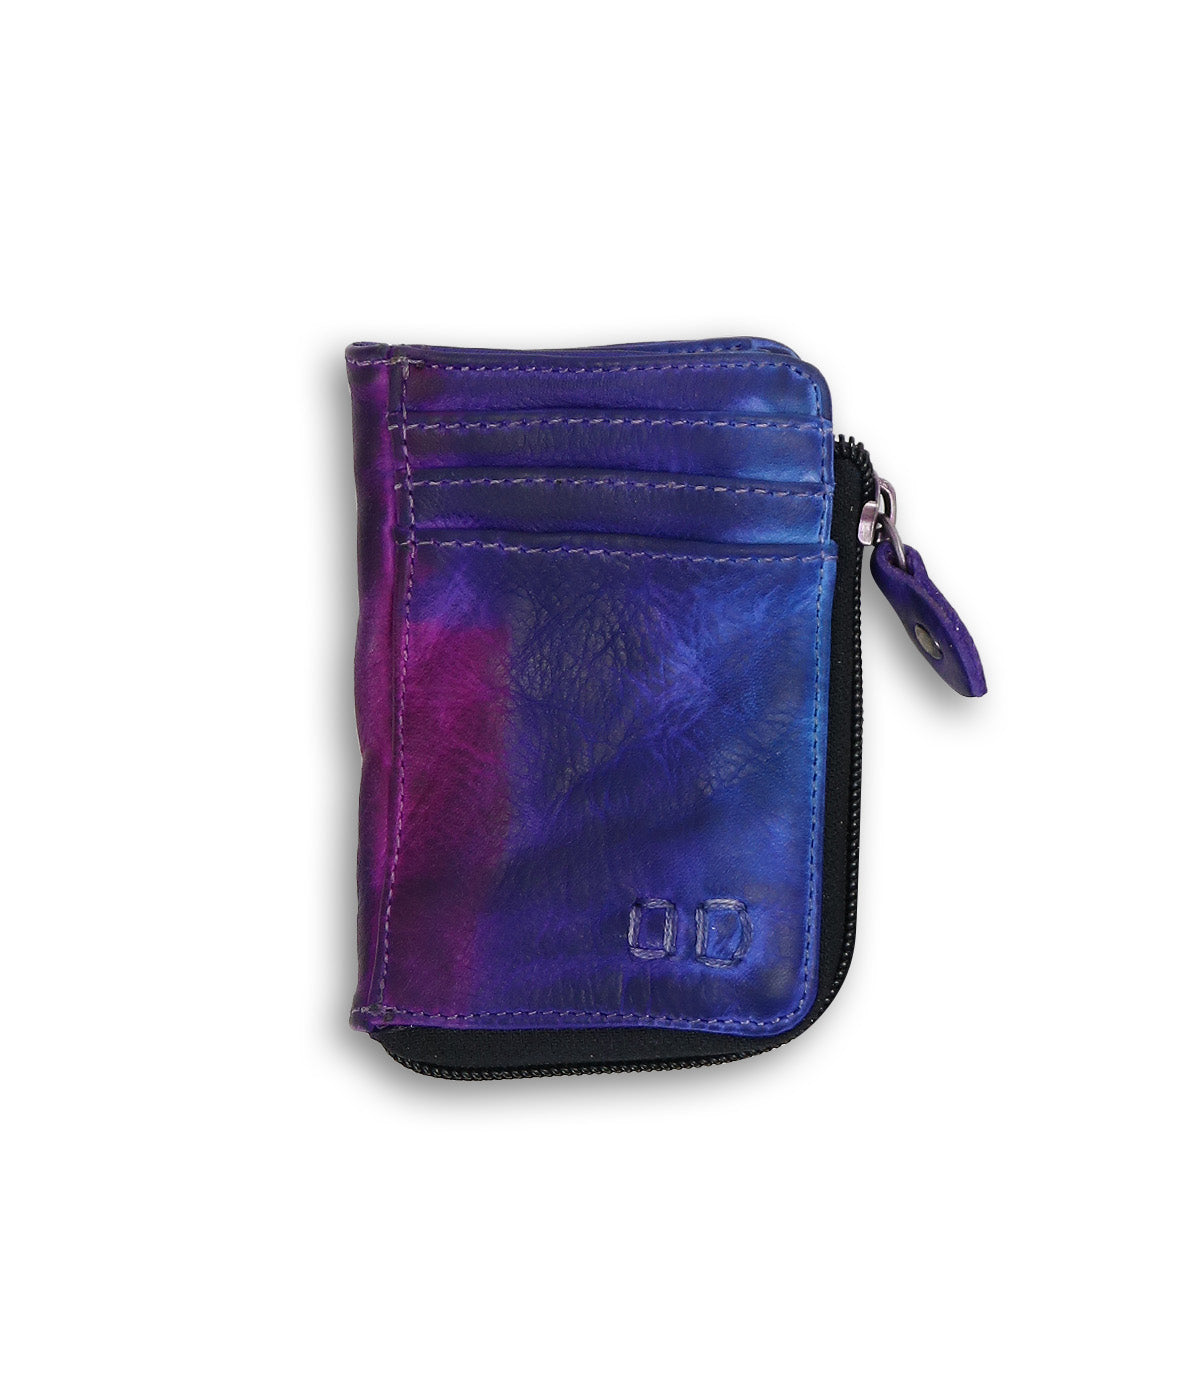 A purple and blue Carrie wallet with a zipper from Bed Stu.